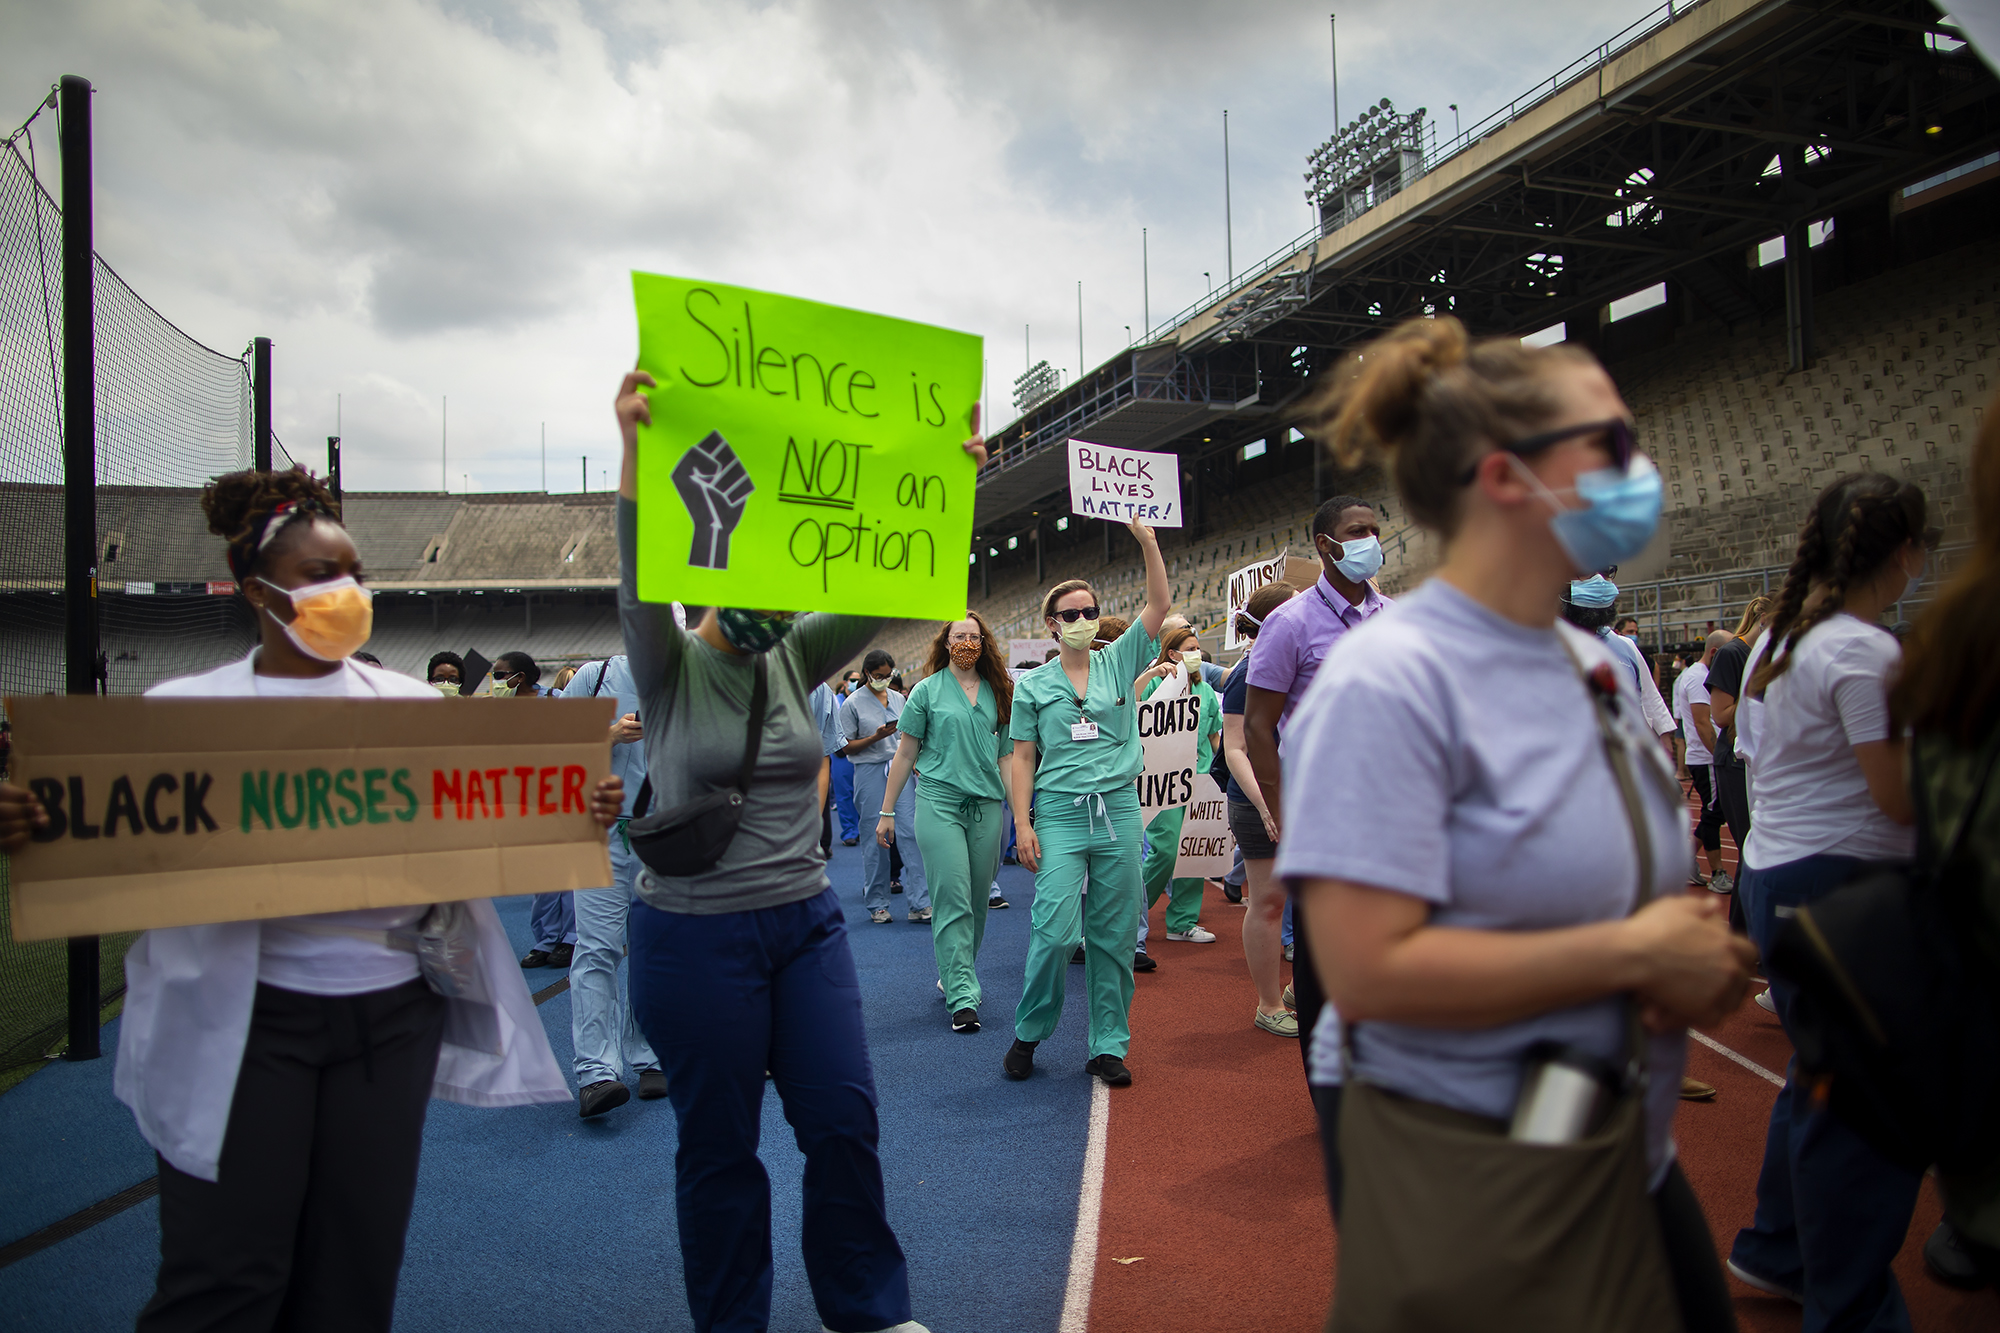 Medical personnel in scrubs, white coats and face masks on the track at Franklin Field, one holds a sign reading Black Nurses Matter, another holds a sign that reads Silence is NOT an option with a raised fist image next to the words.